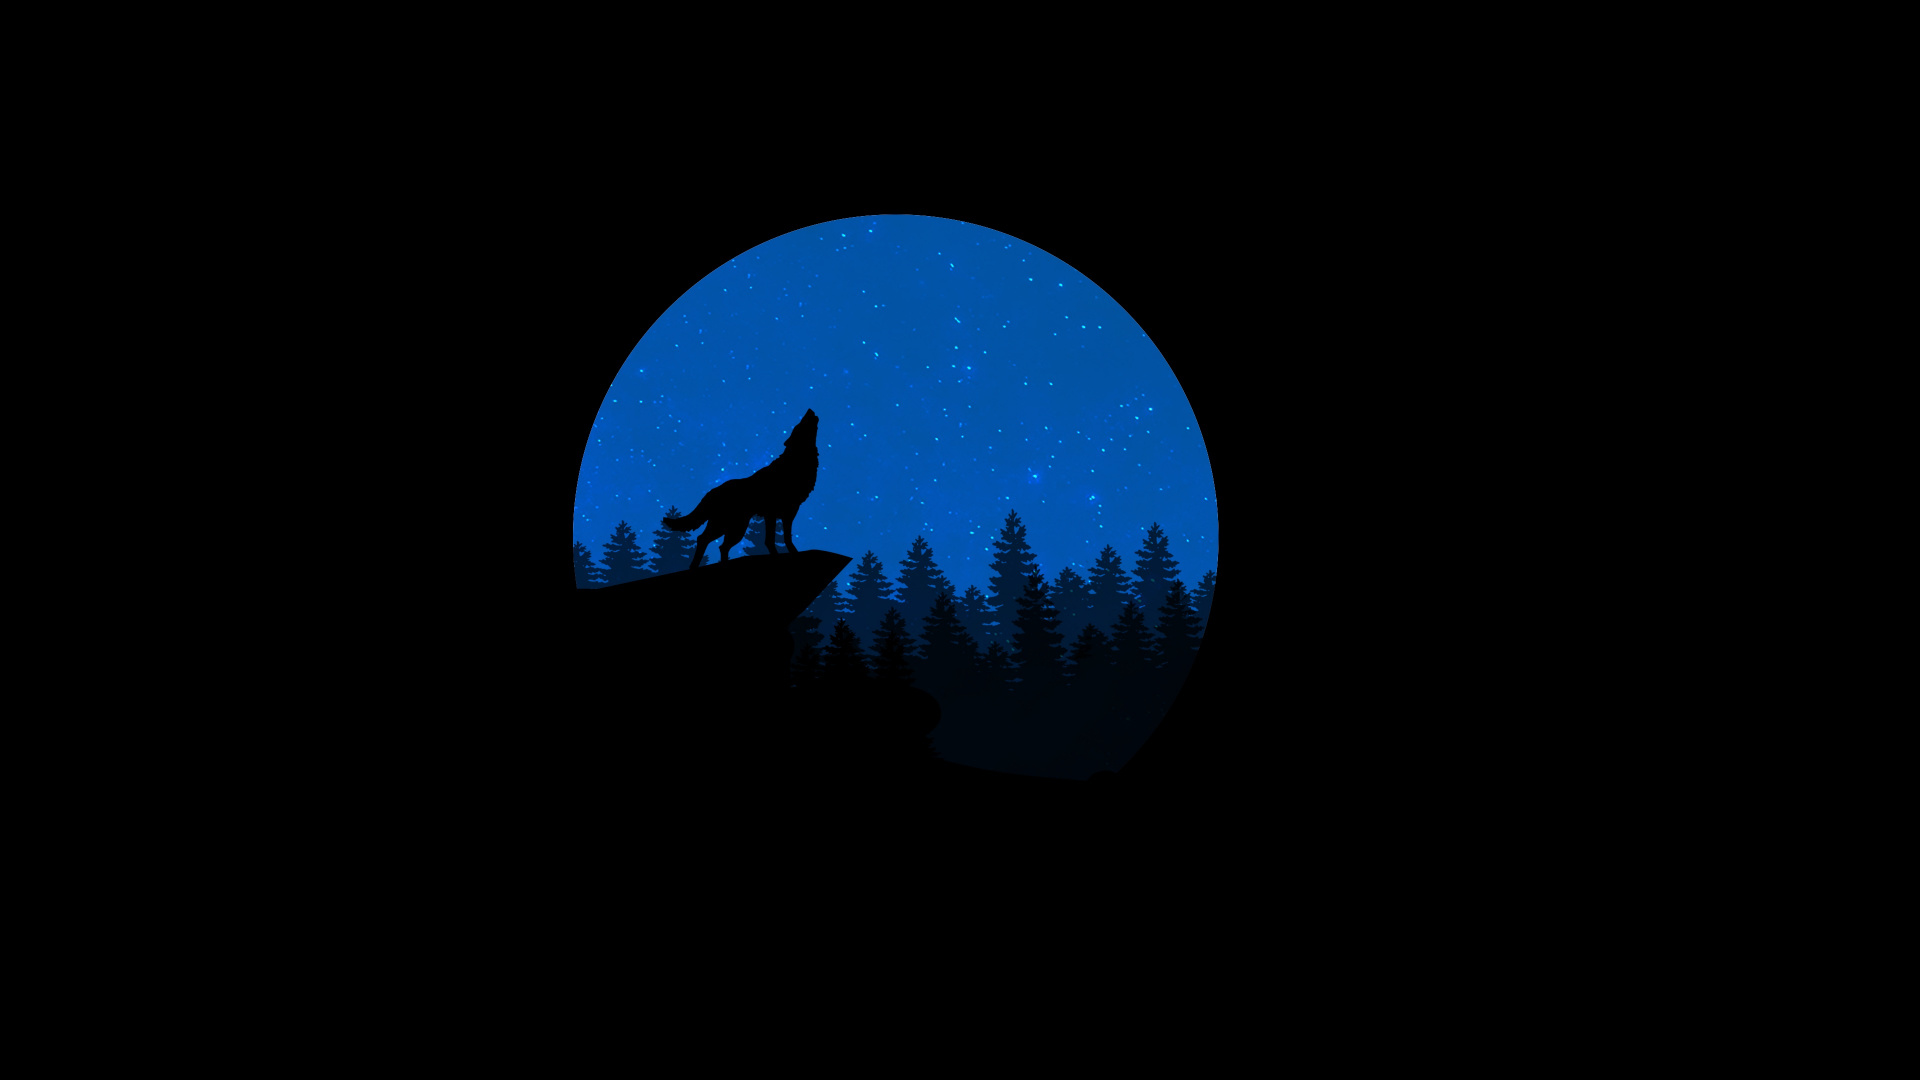 Silhouette of Person Standing Under Blue Moon. Wallpaper in 1920x1080 Resolution